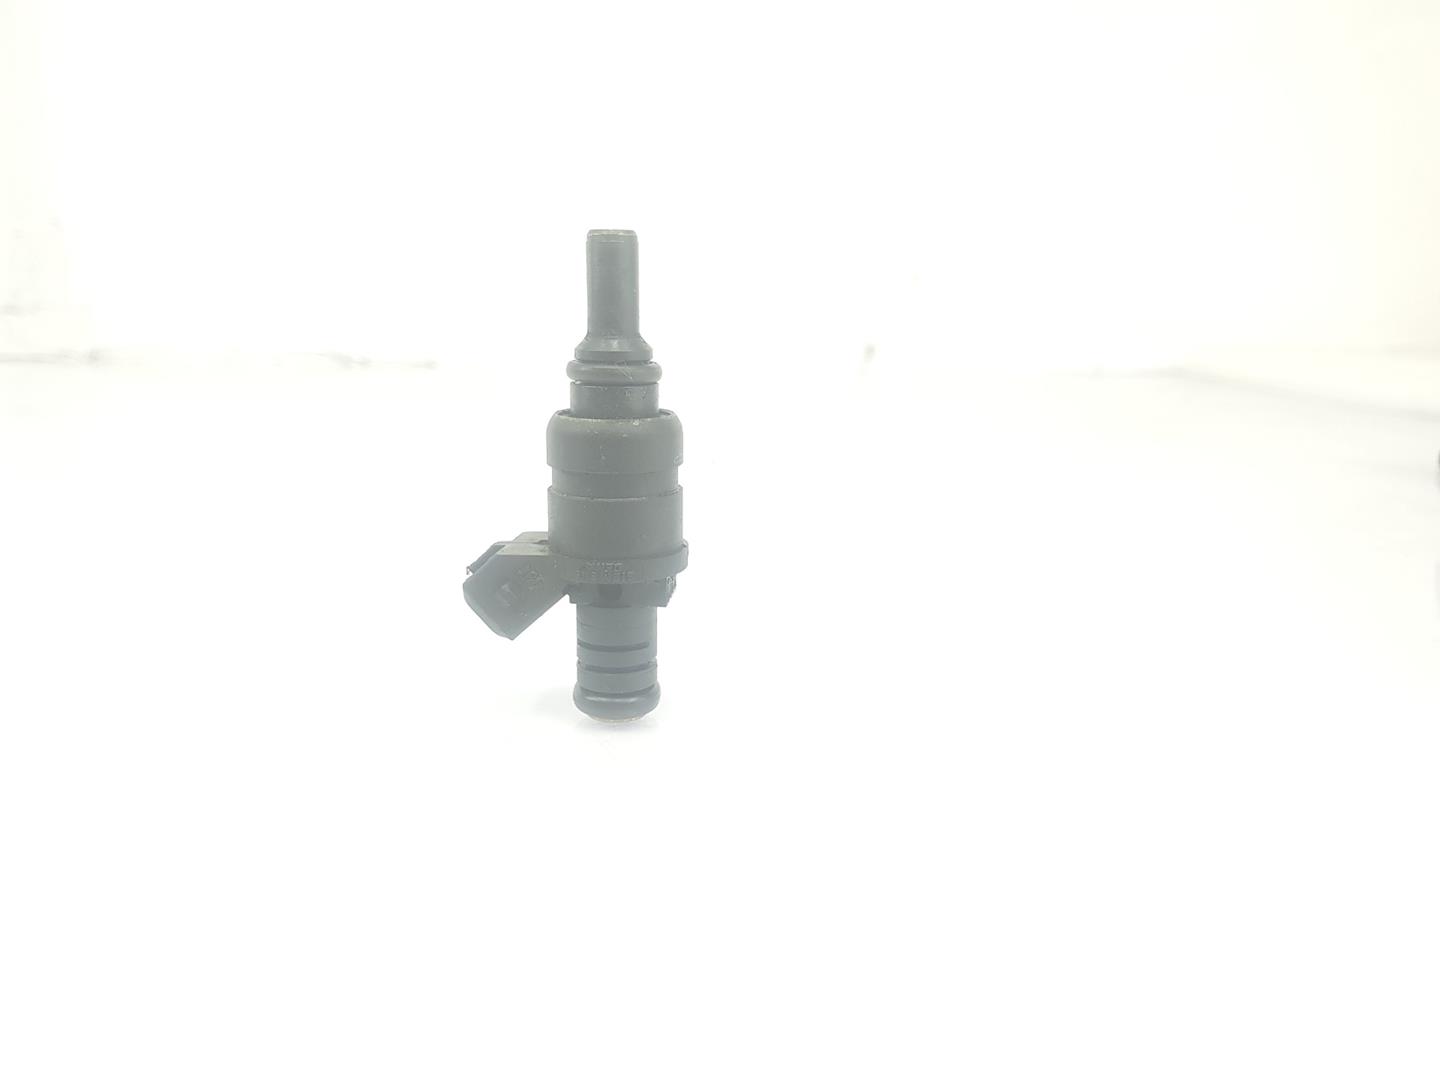 BMW 3 Series E46 (1997-2006) Fuel Injector 11001714564, 1714564 24193775